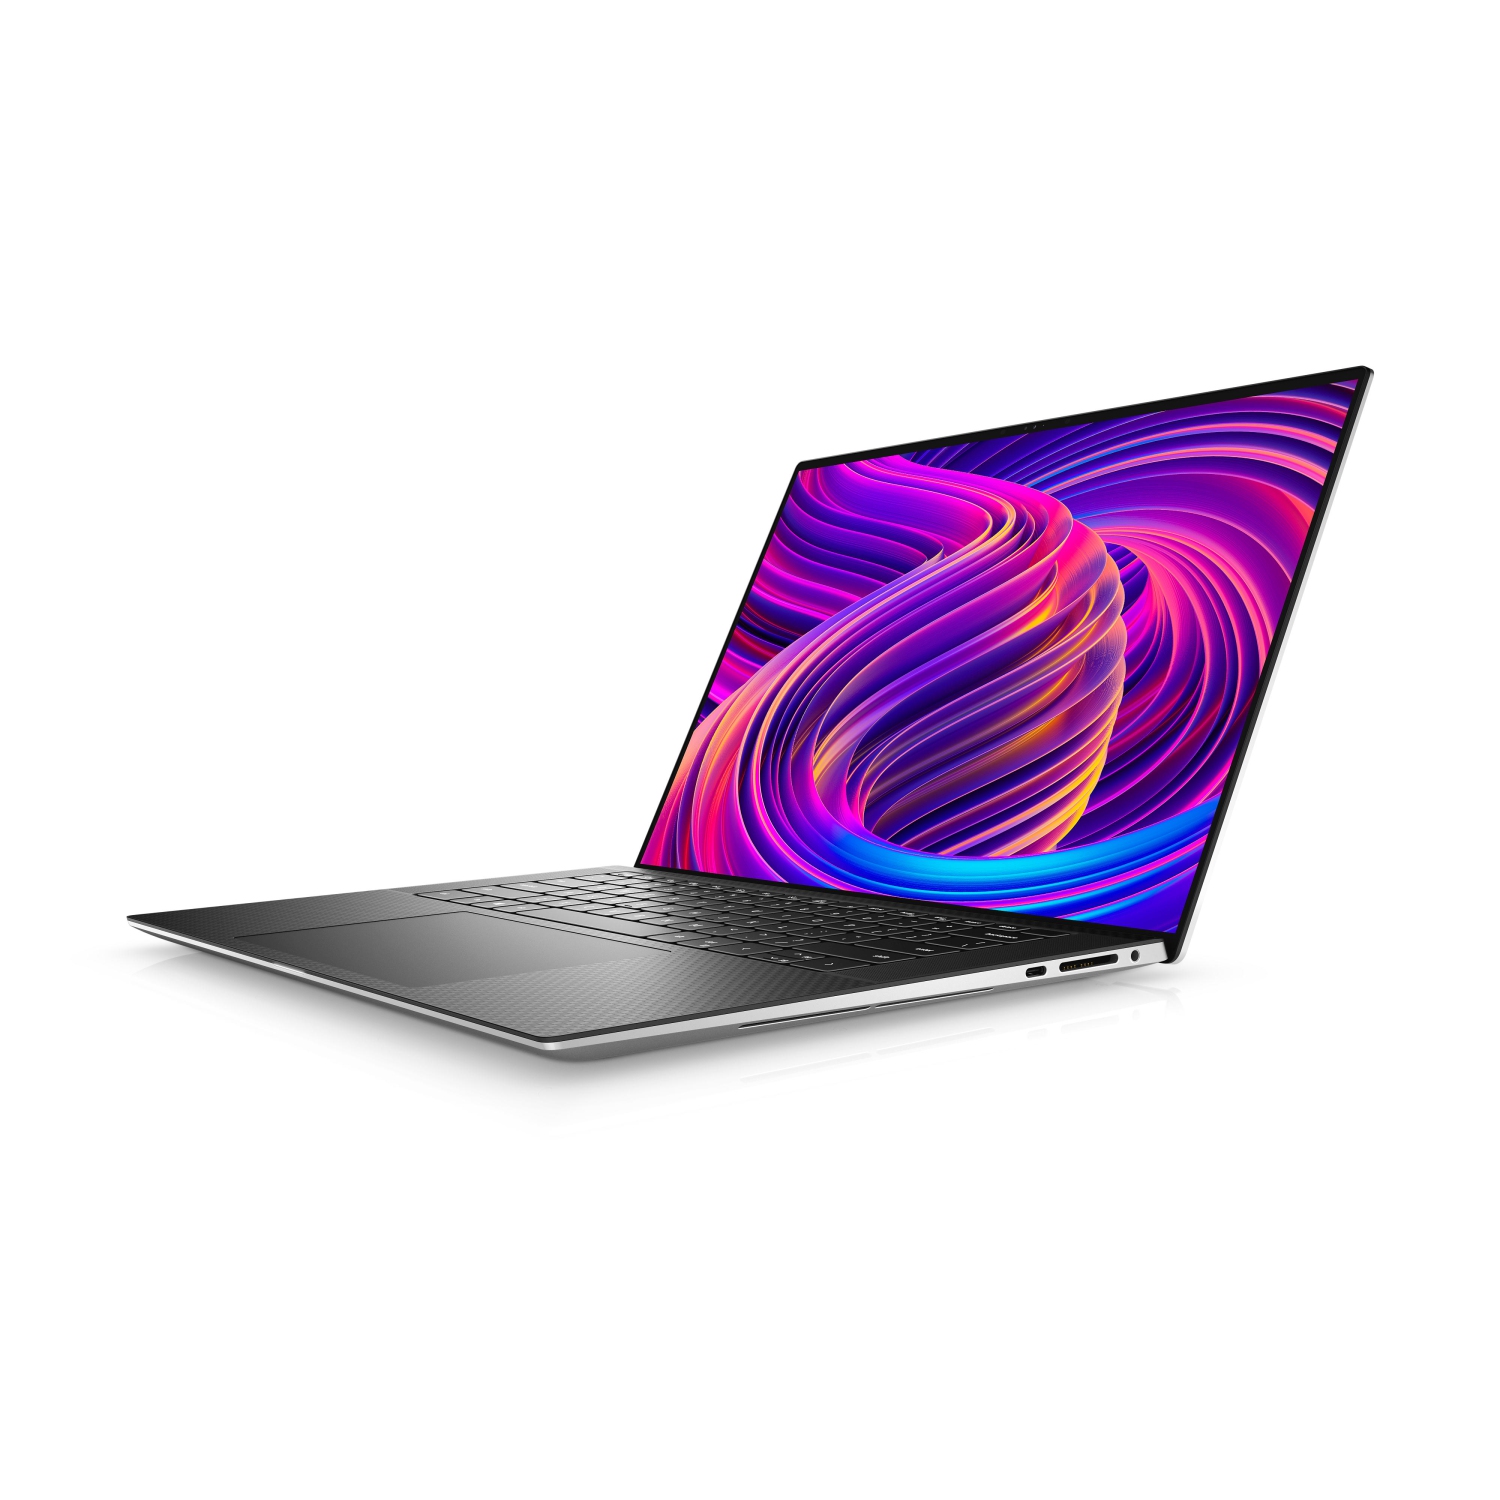 Refurbished (Excellent) - Dell XPS 15 9510 Laptop (2021), 15.6" 4K Touch, Core i9 - 1TB SSD - 32GB RAM - 3050 Ti, 8 Cores @ 4.9 GHz - 11th Gen CPU Certified Refurbished